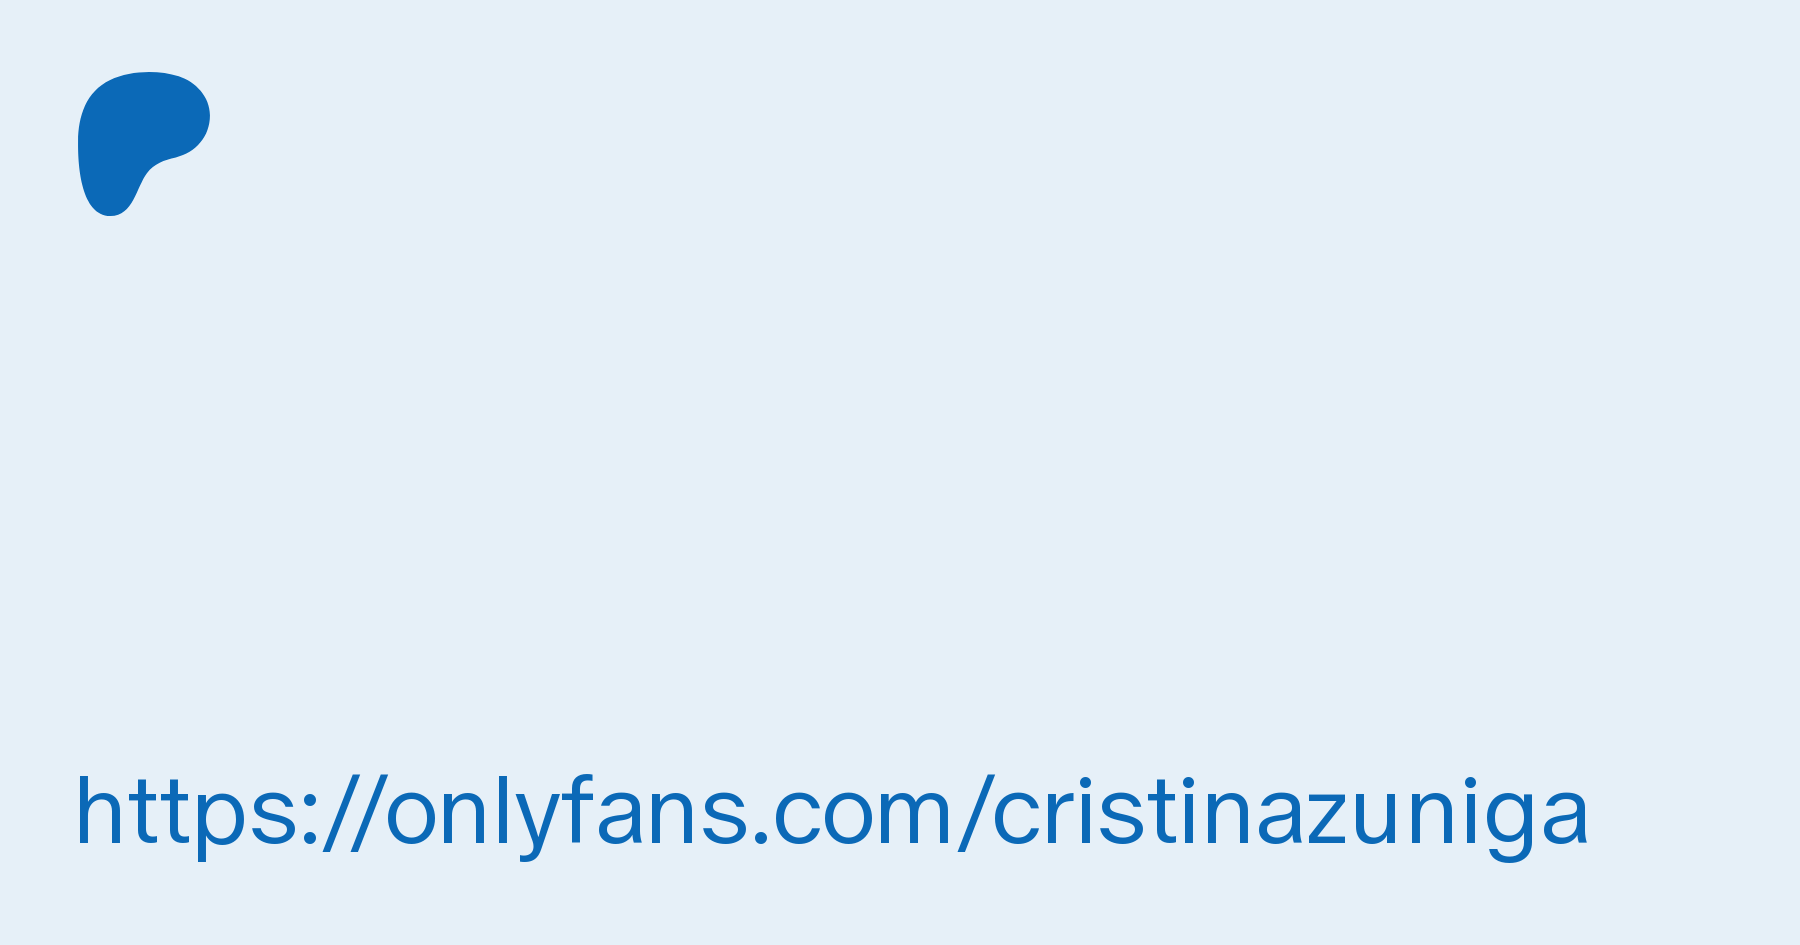 Zuniga only fans cristina The Thicket